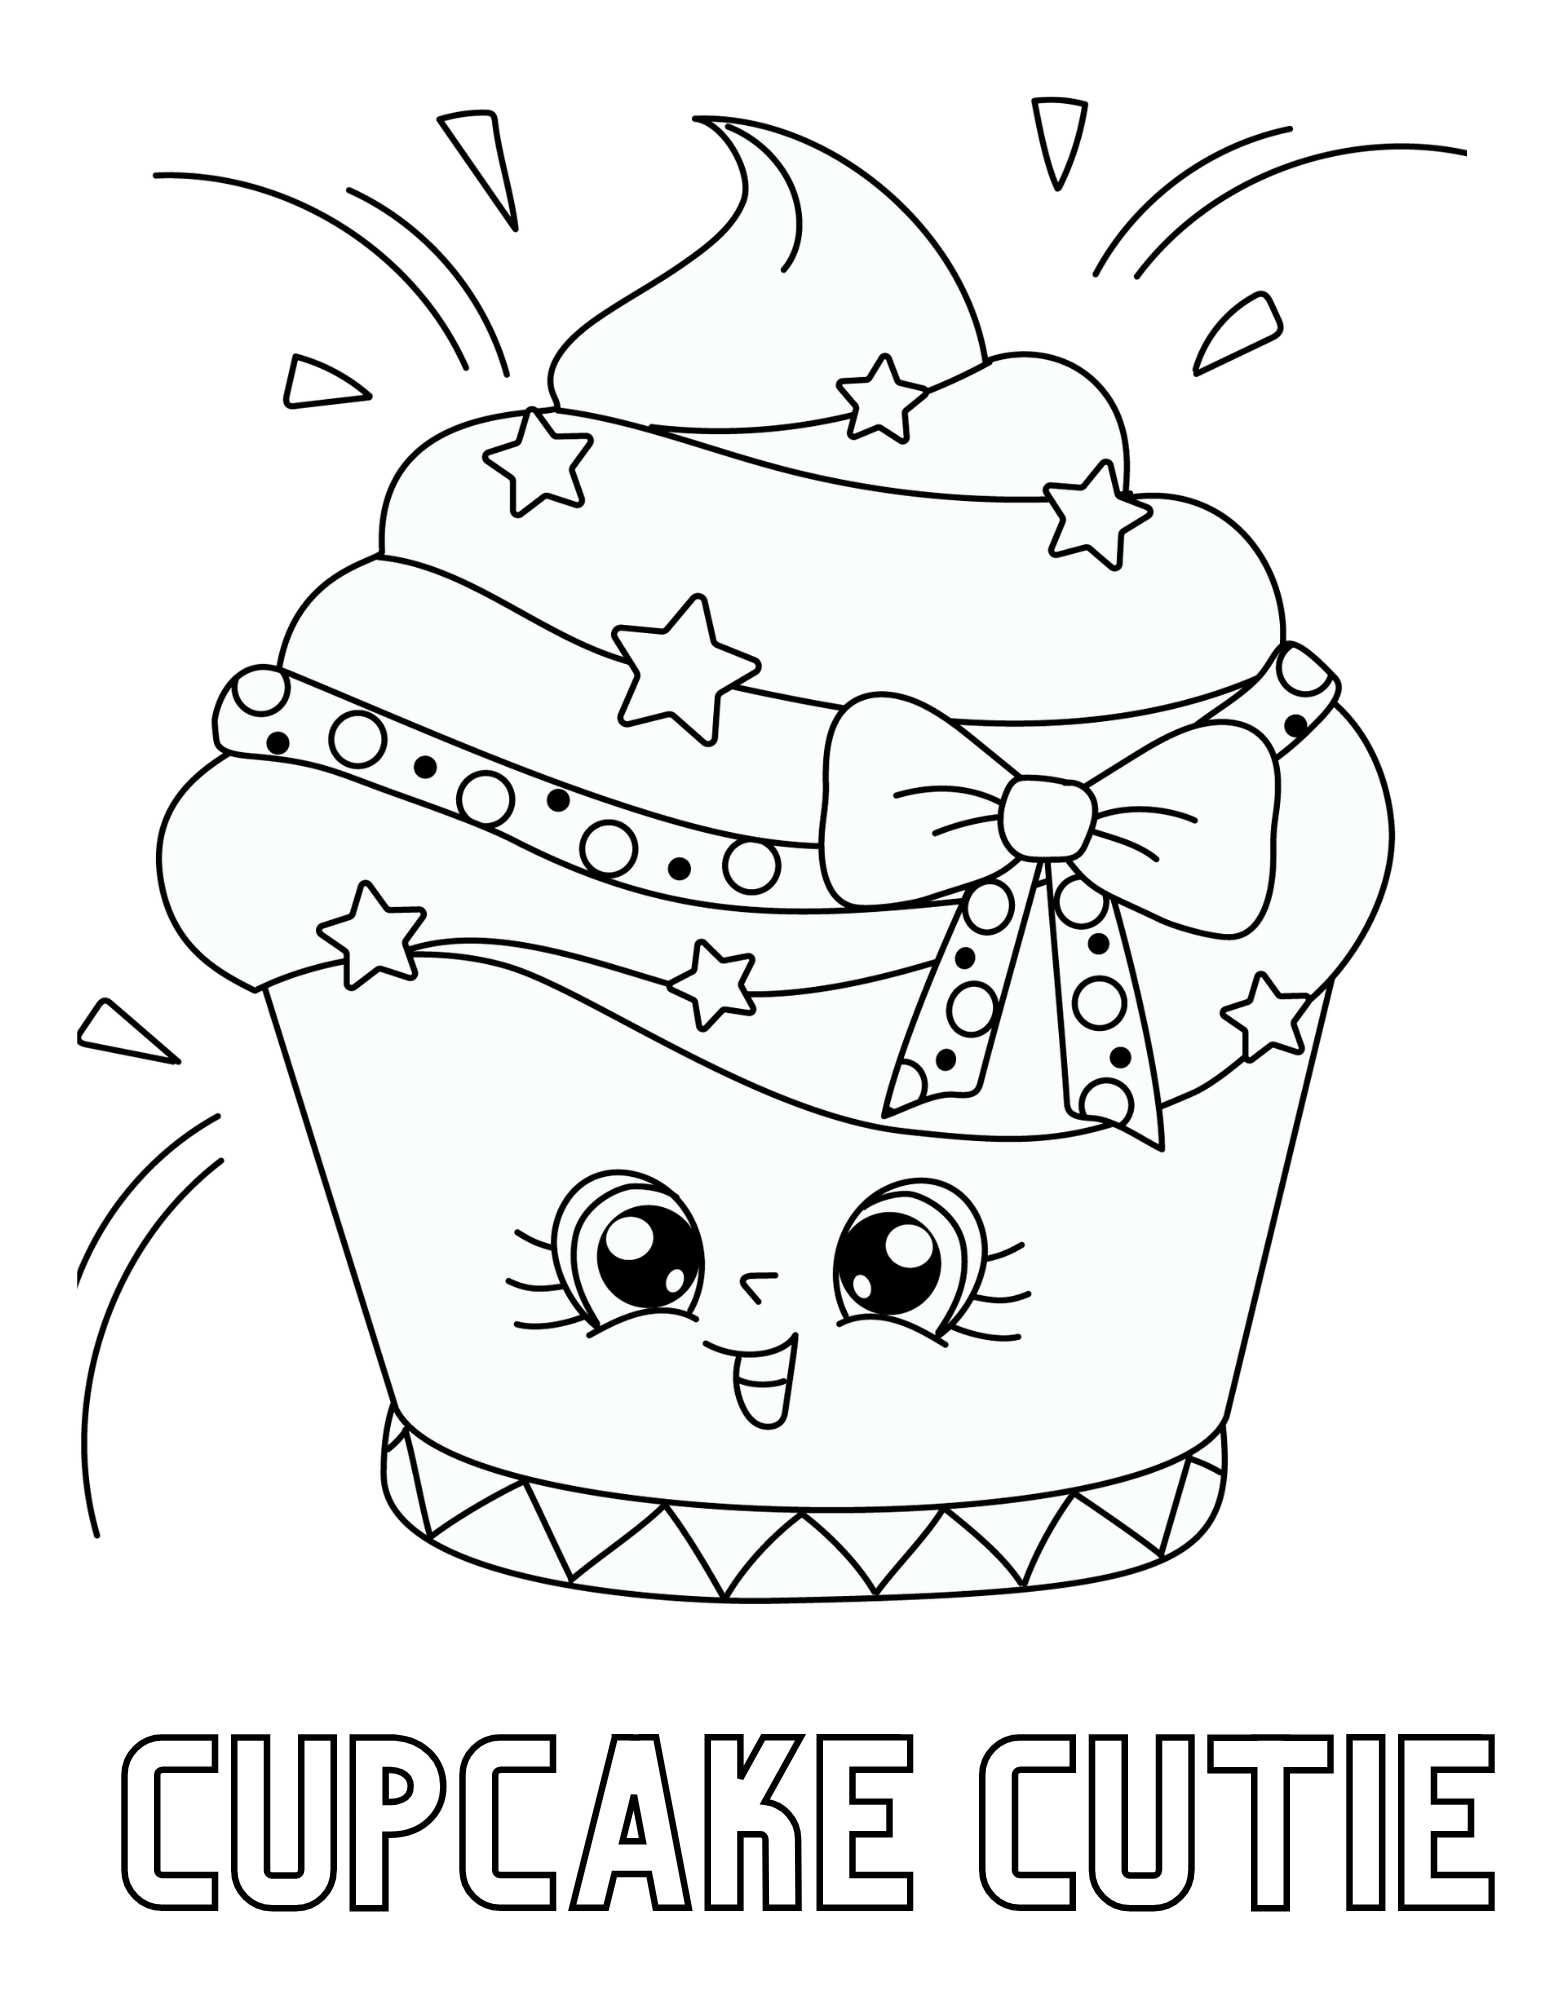 Print these cute cupcake coloring pages for kids and adults